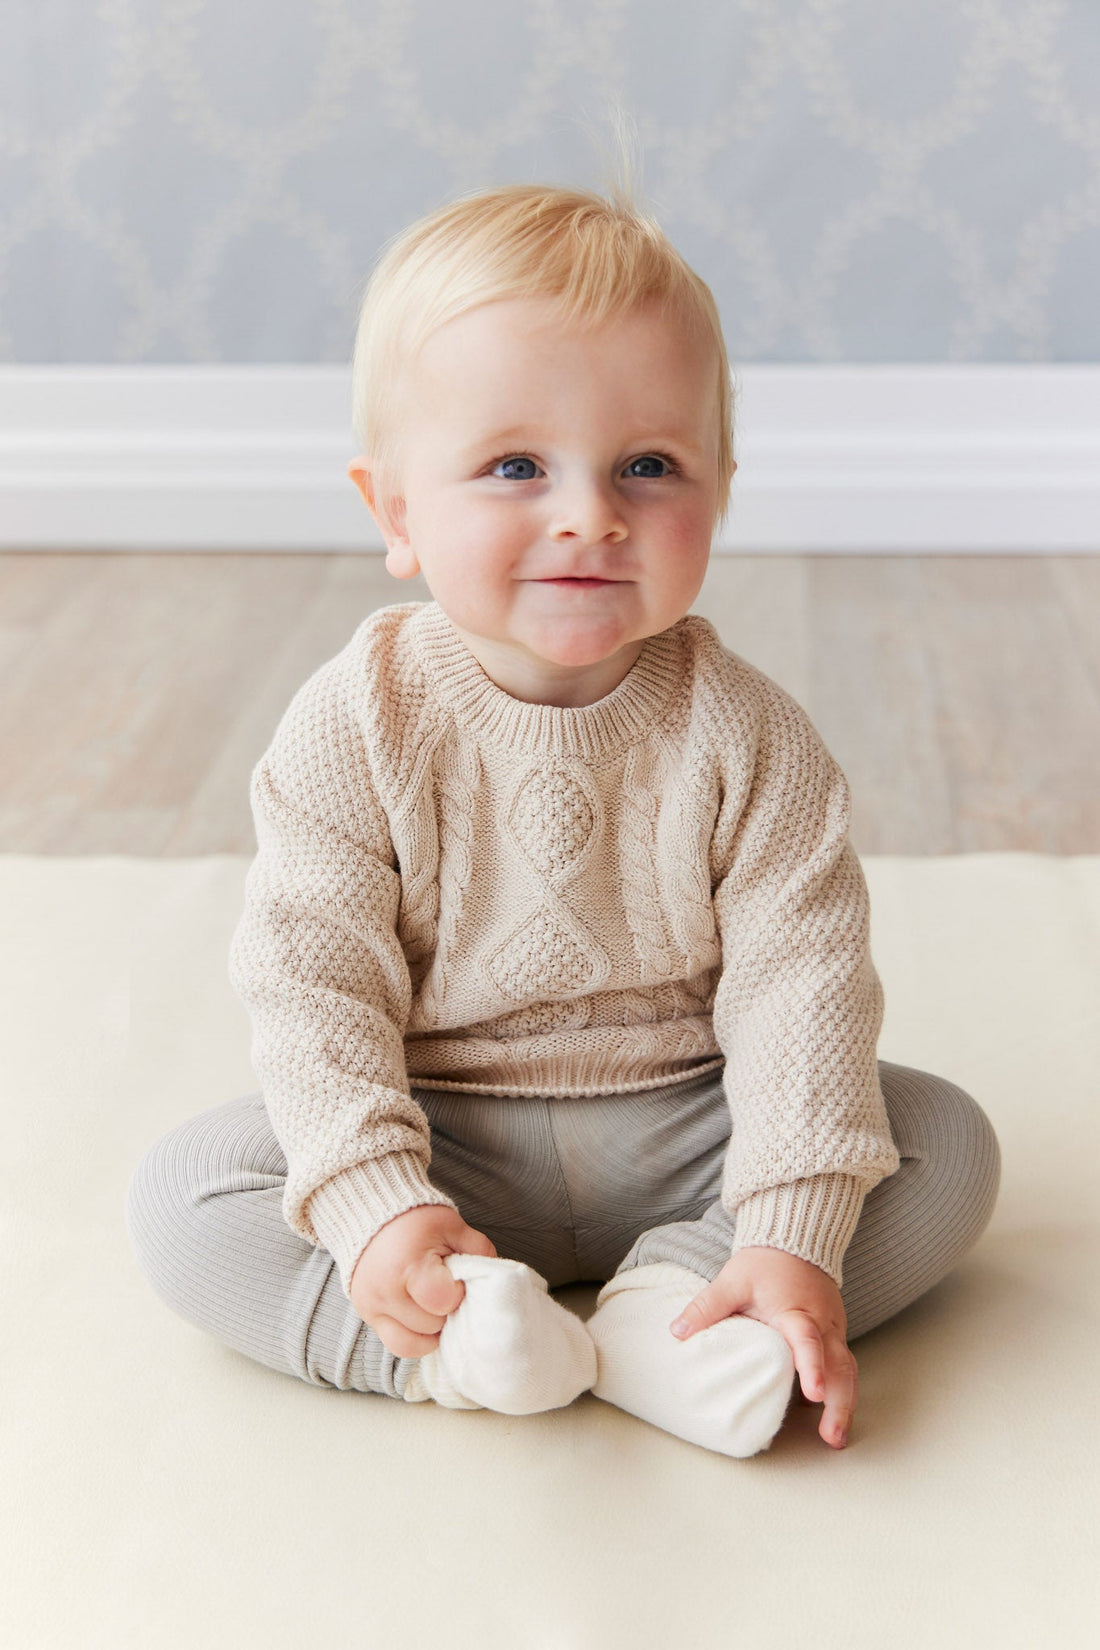 Carter Jumper - Oatmeal Marle Childrens Jumper from Jamie Kay USA